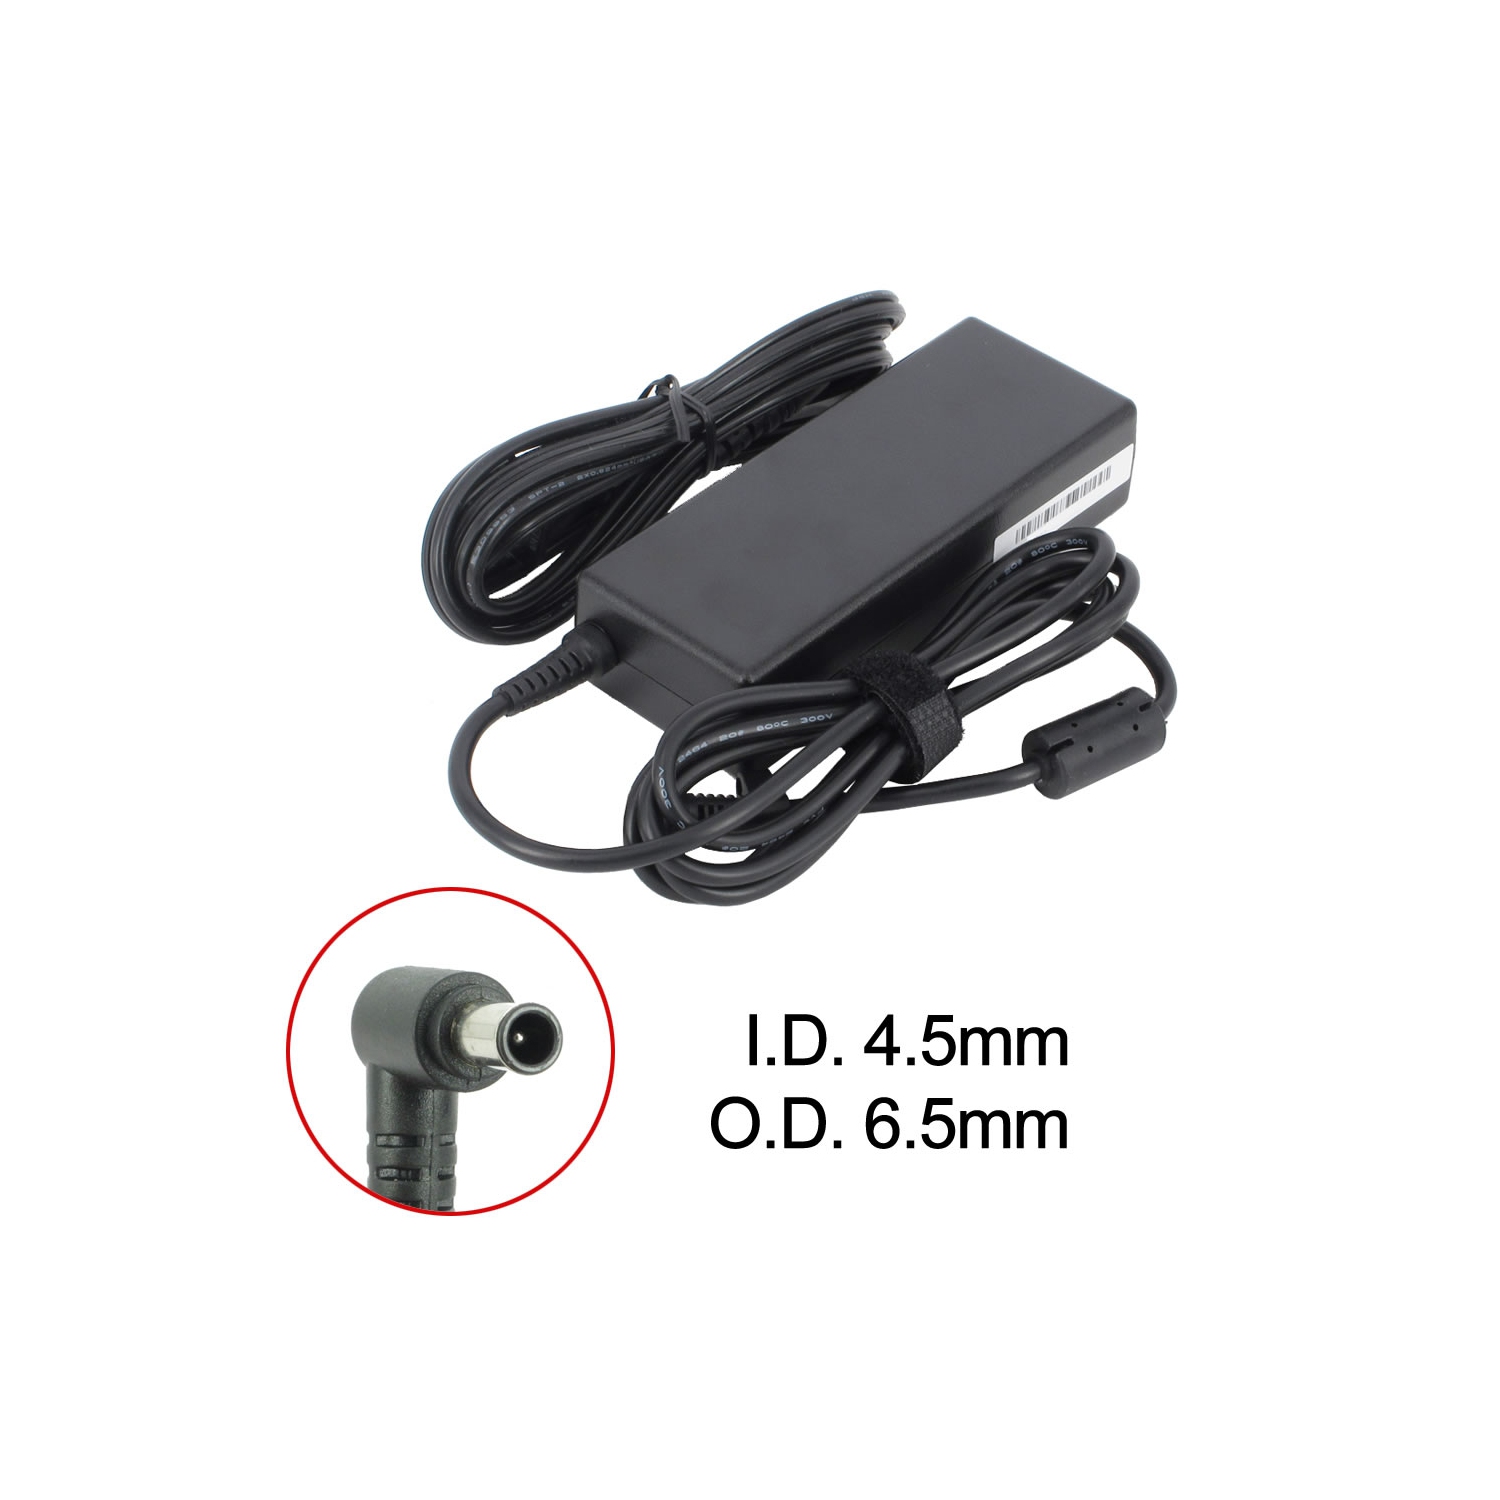 Brand New Laptop AC Adapter for LG XNOTE X170, ADP-90TH A, PCGA-AC19V19, VGP-AC19V14, VGP-AC19V26, VGP-AC19V43